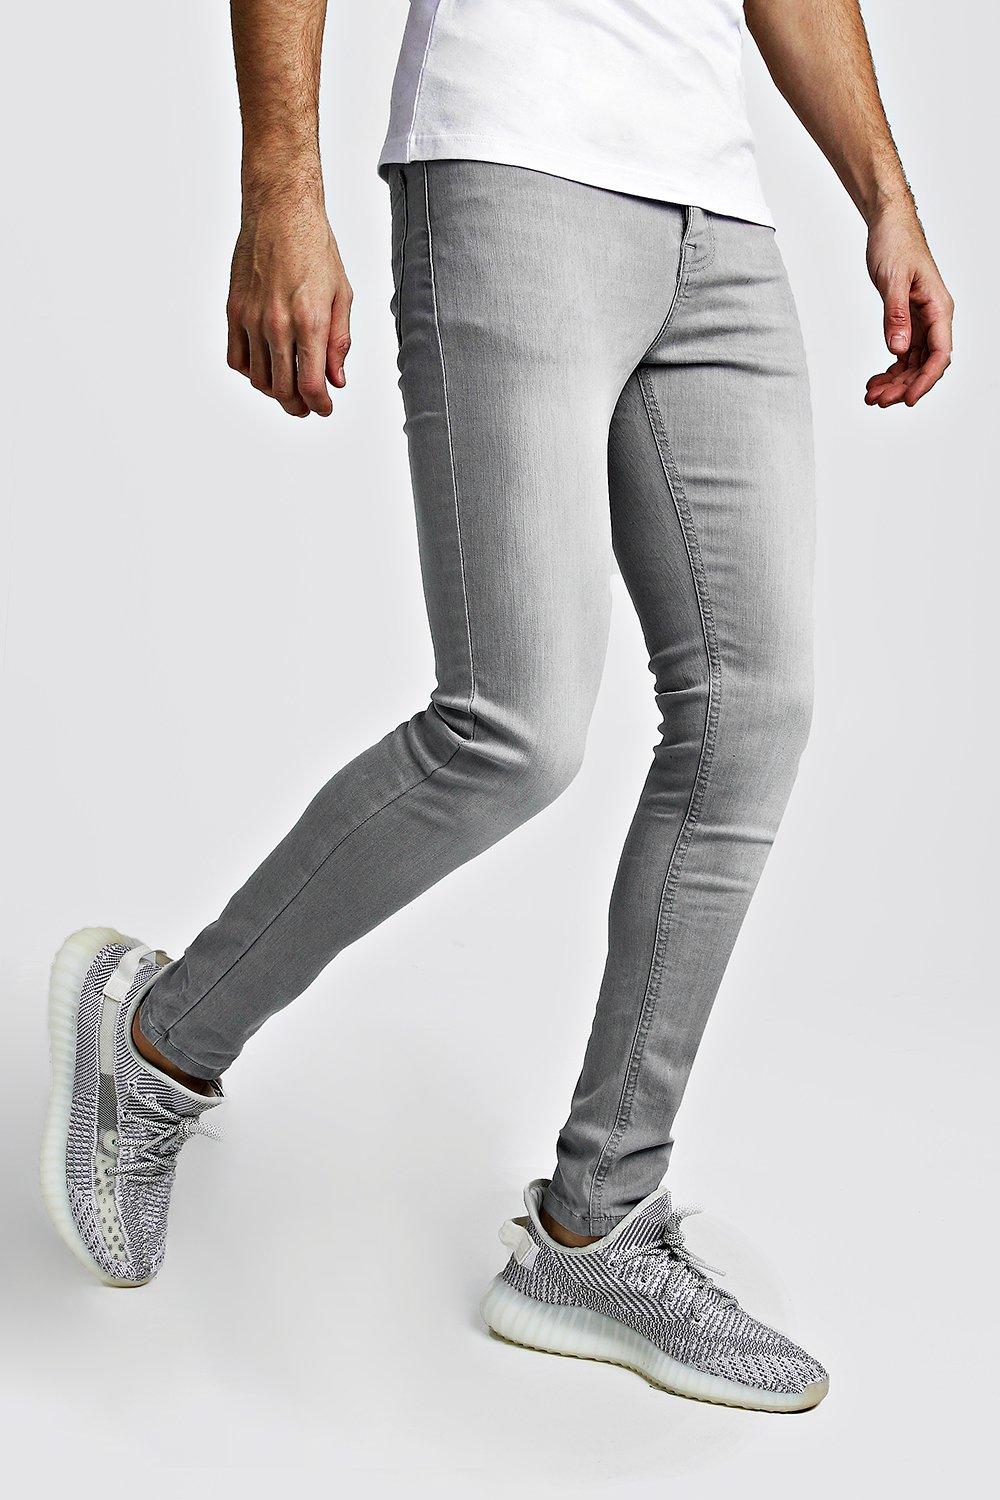 light grey jeans mens outfit